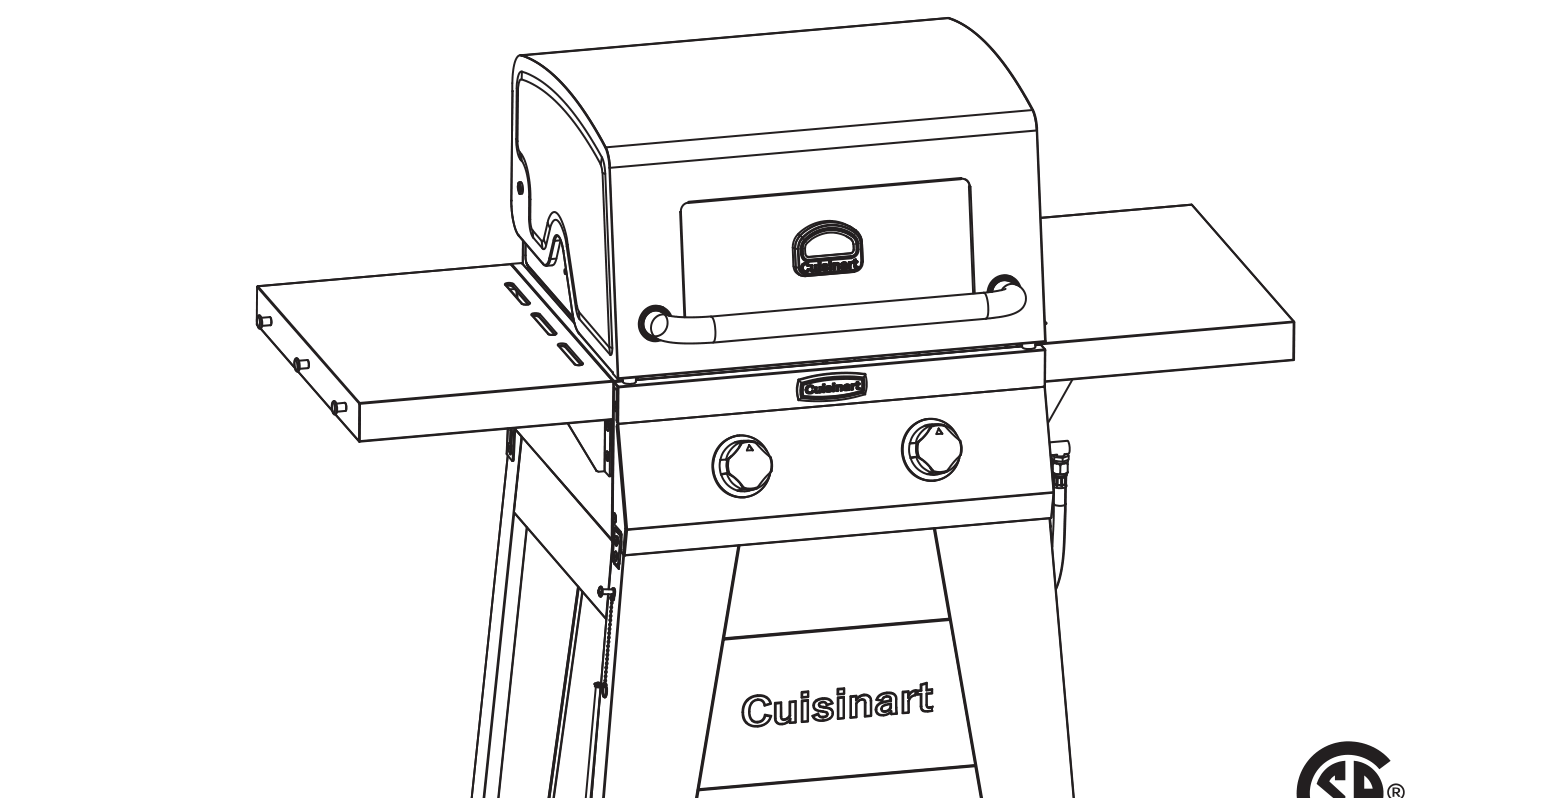 Cuisinart Deluxe Two Burner Gas Grill [GAS0256AS, GAS0256ASO] User Manual